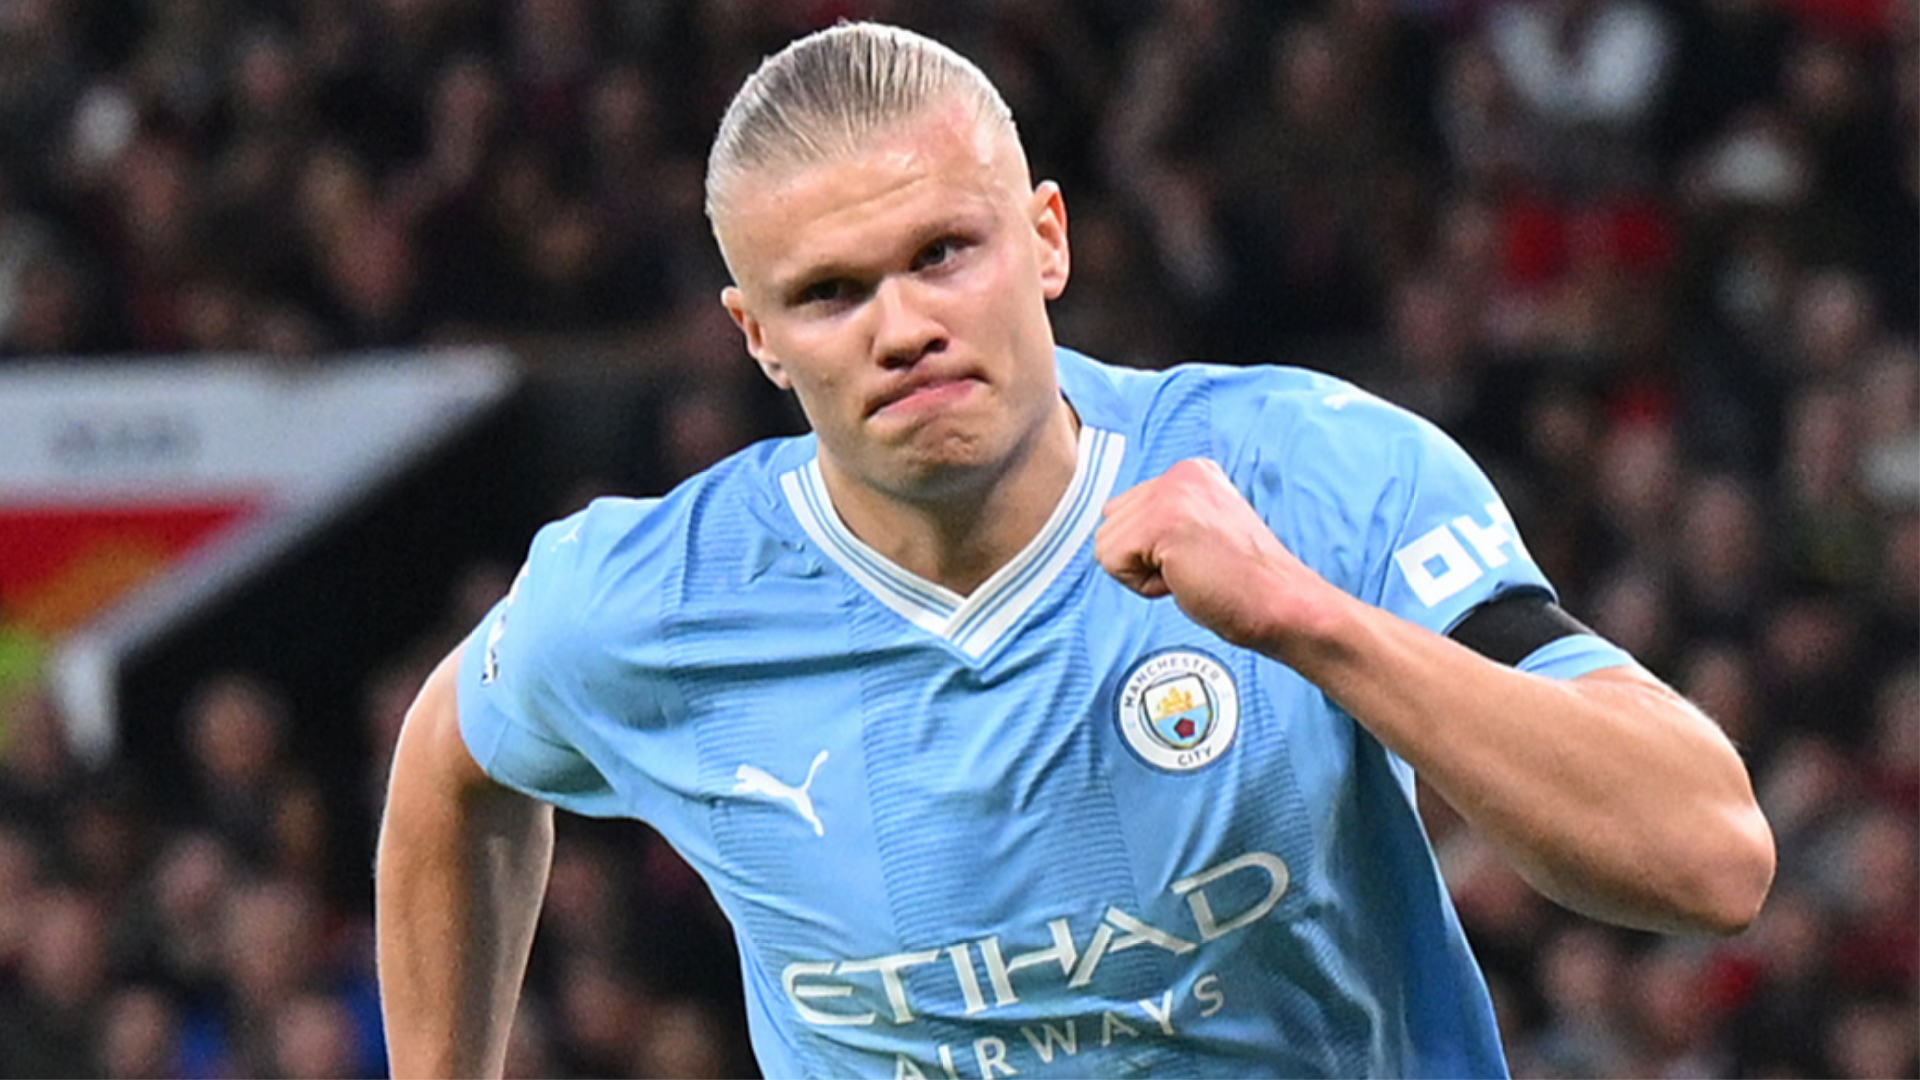 Another record for Erling Haaland! Prolific Man City striker hits new milestone for Premier League away goals in derby clash with Man Utd | Goal.com US